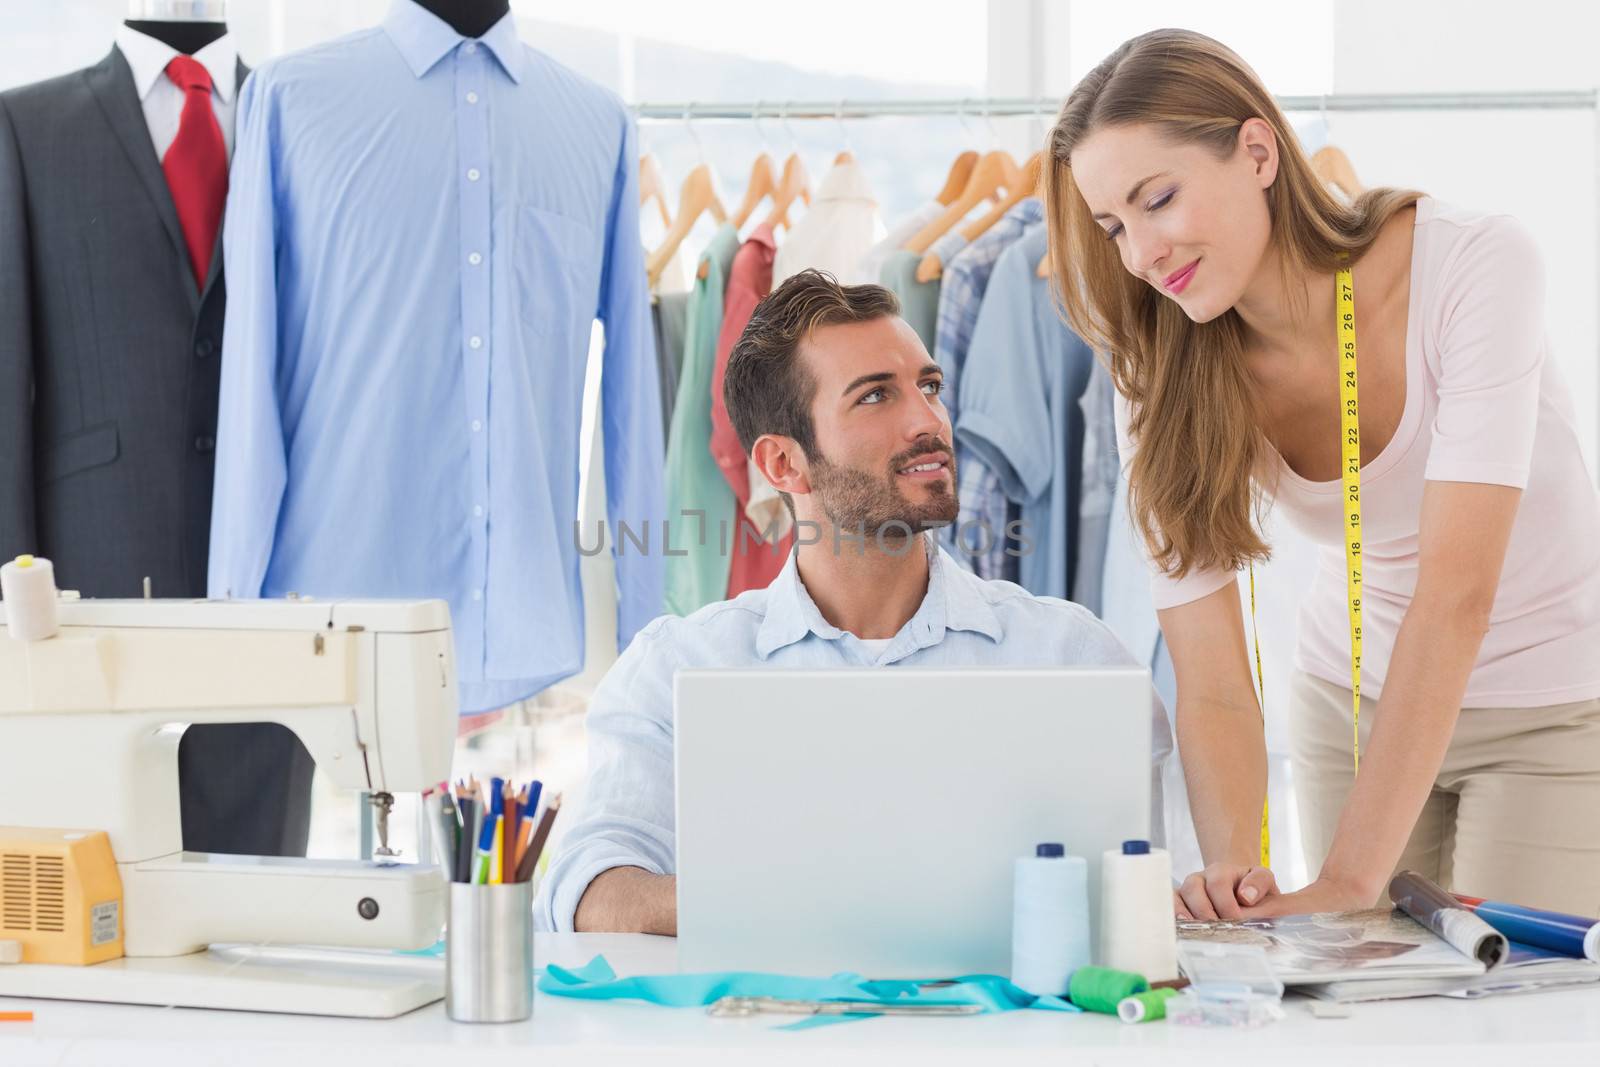 Male and female fashion designers using laptop at work in a studio